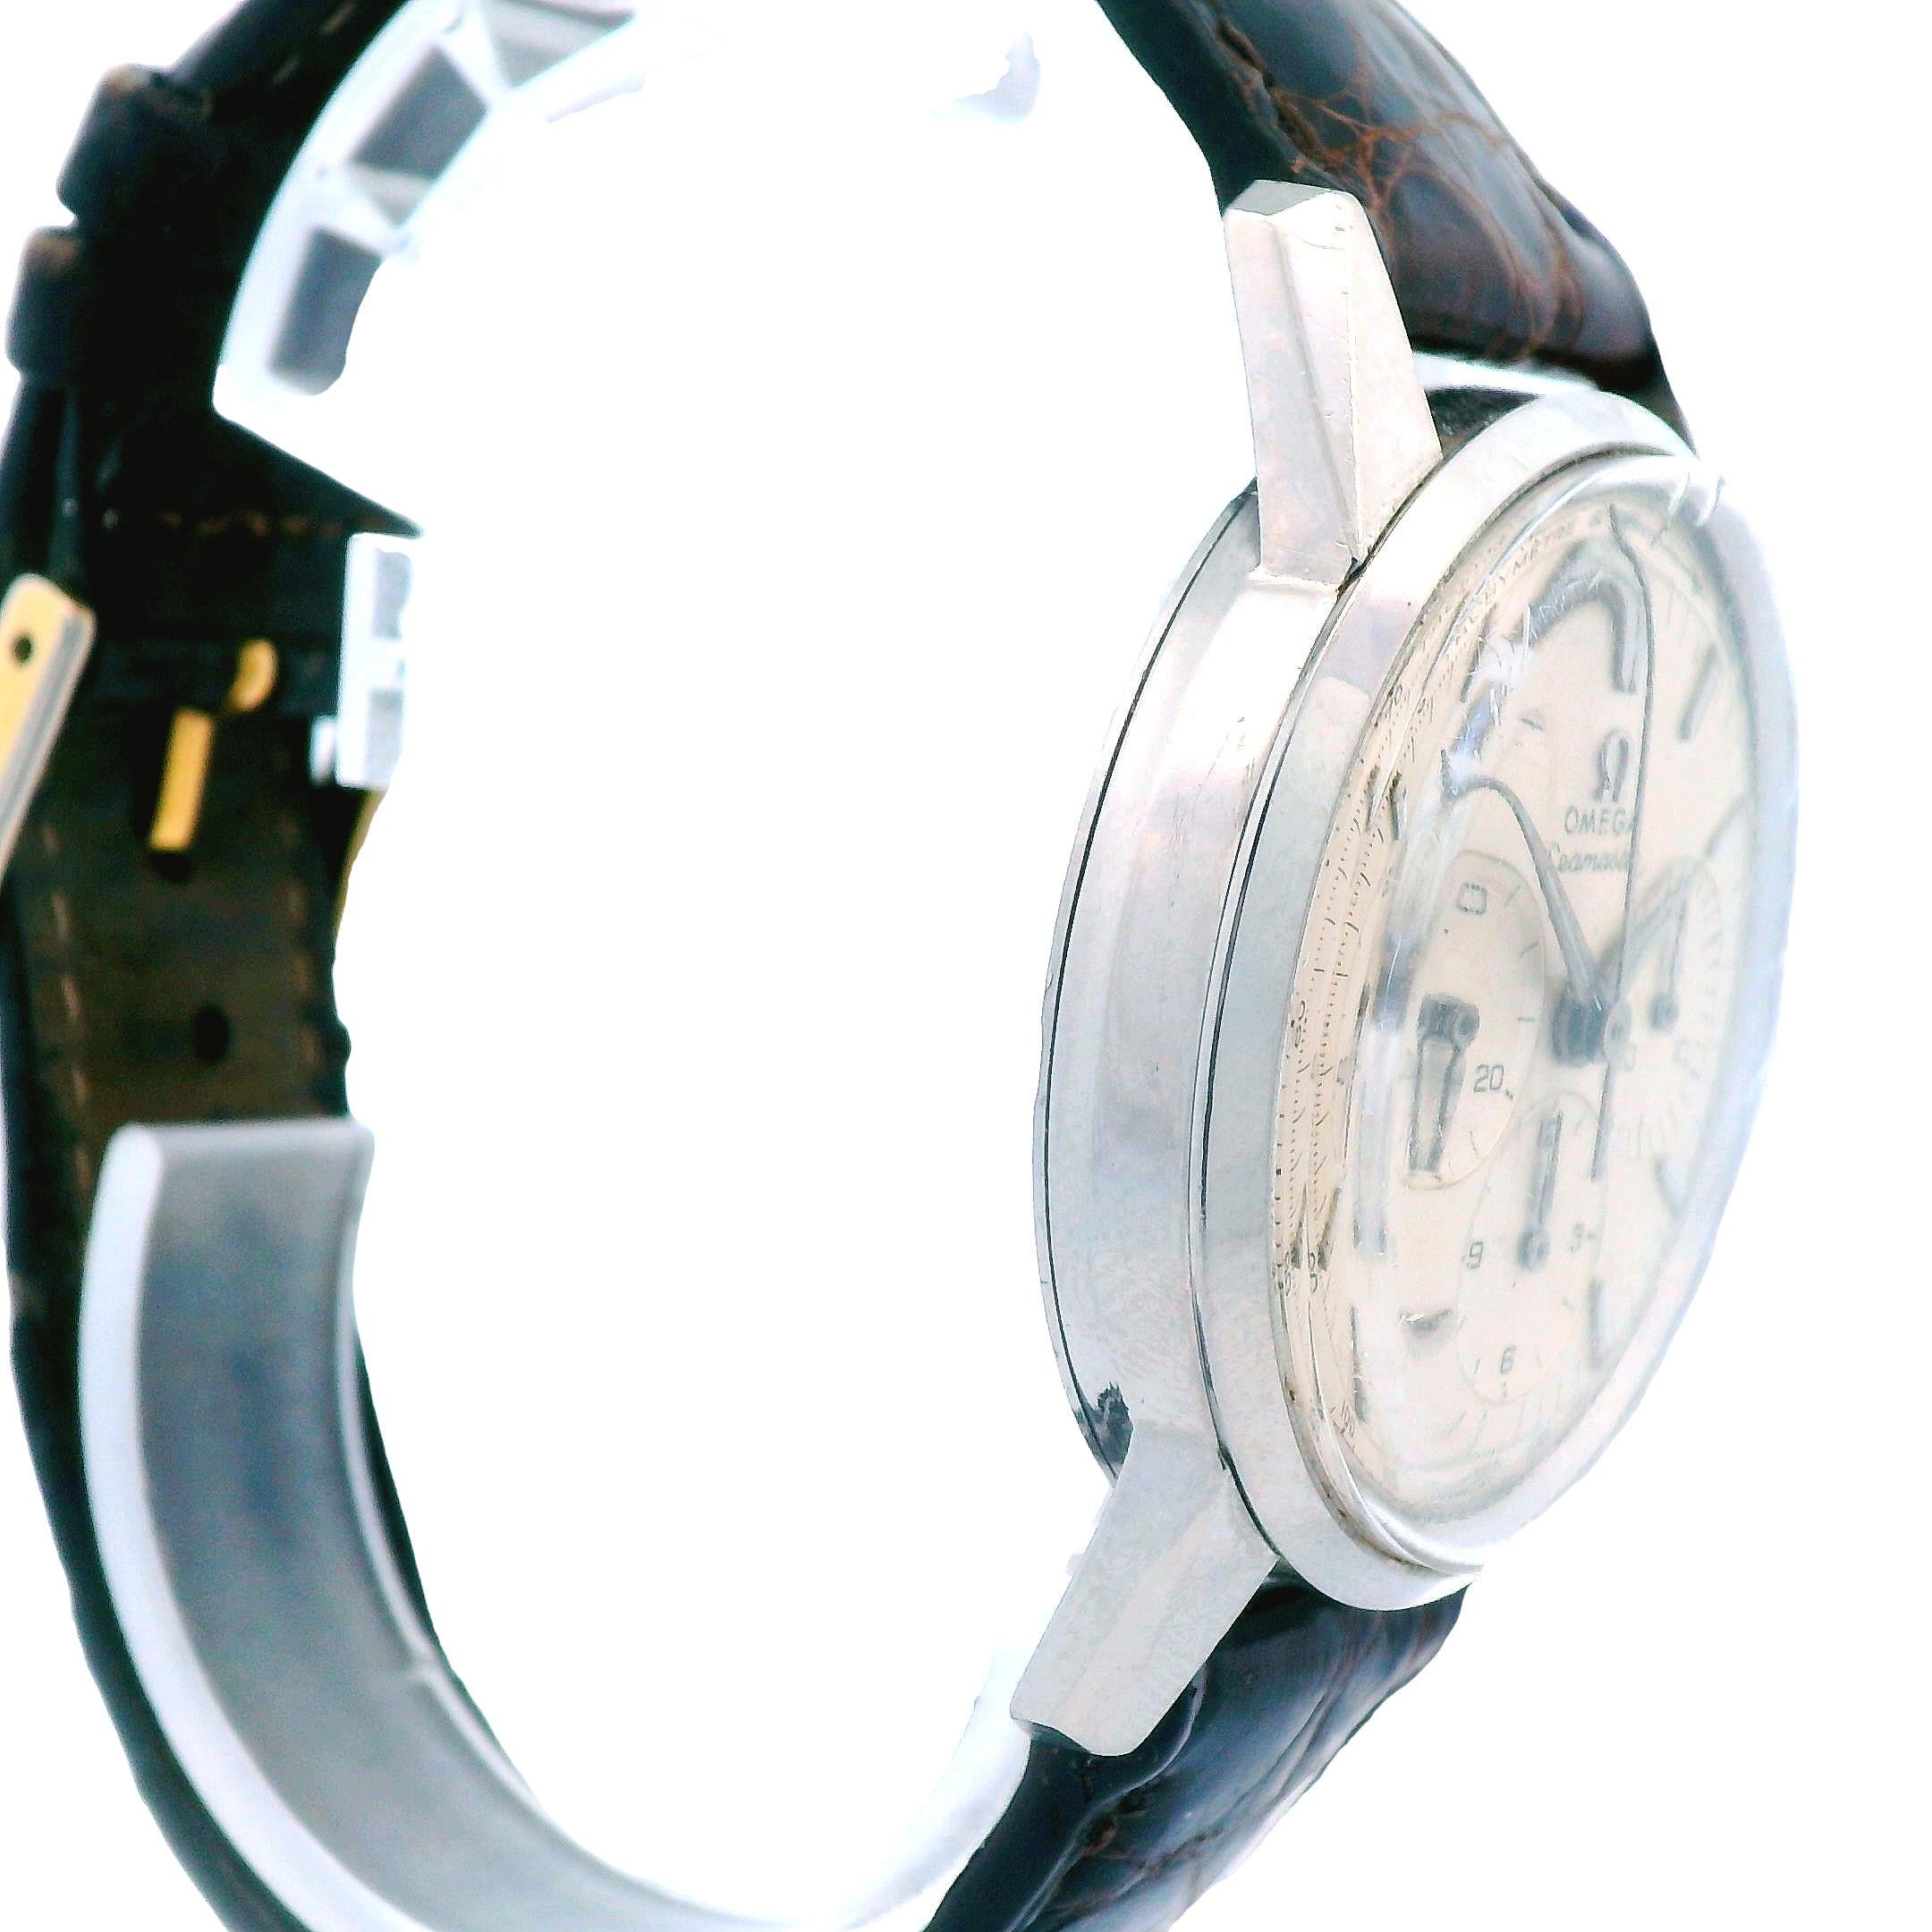 Women's 1960s Omega Seamaster Chronograph Watch in Stainless Steel - Running For Sale